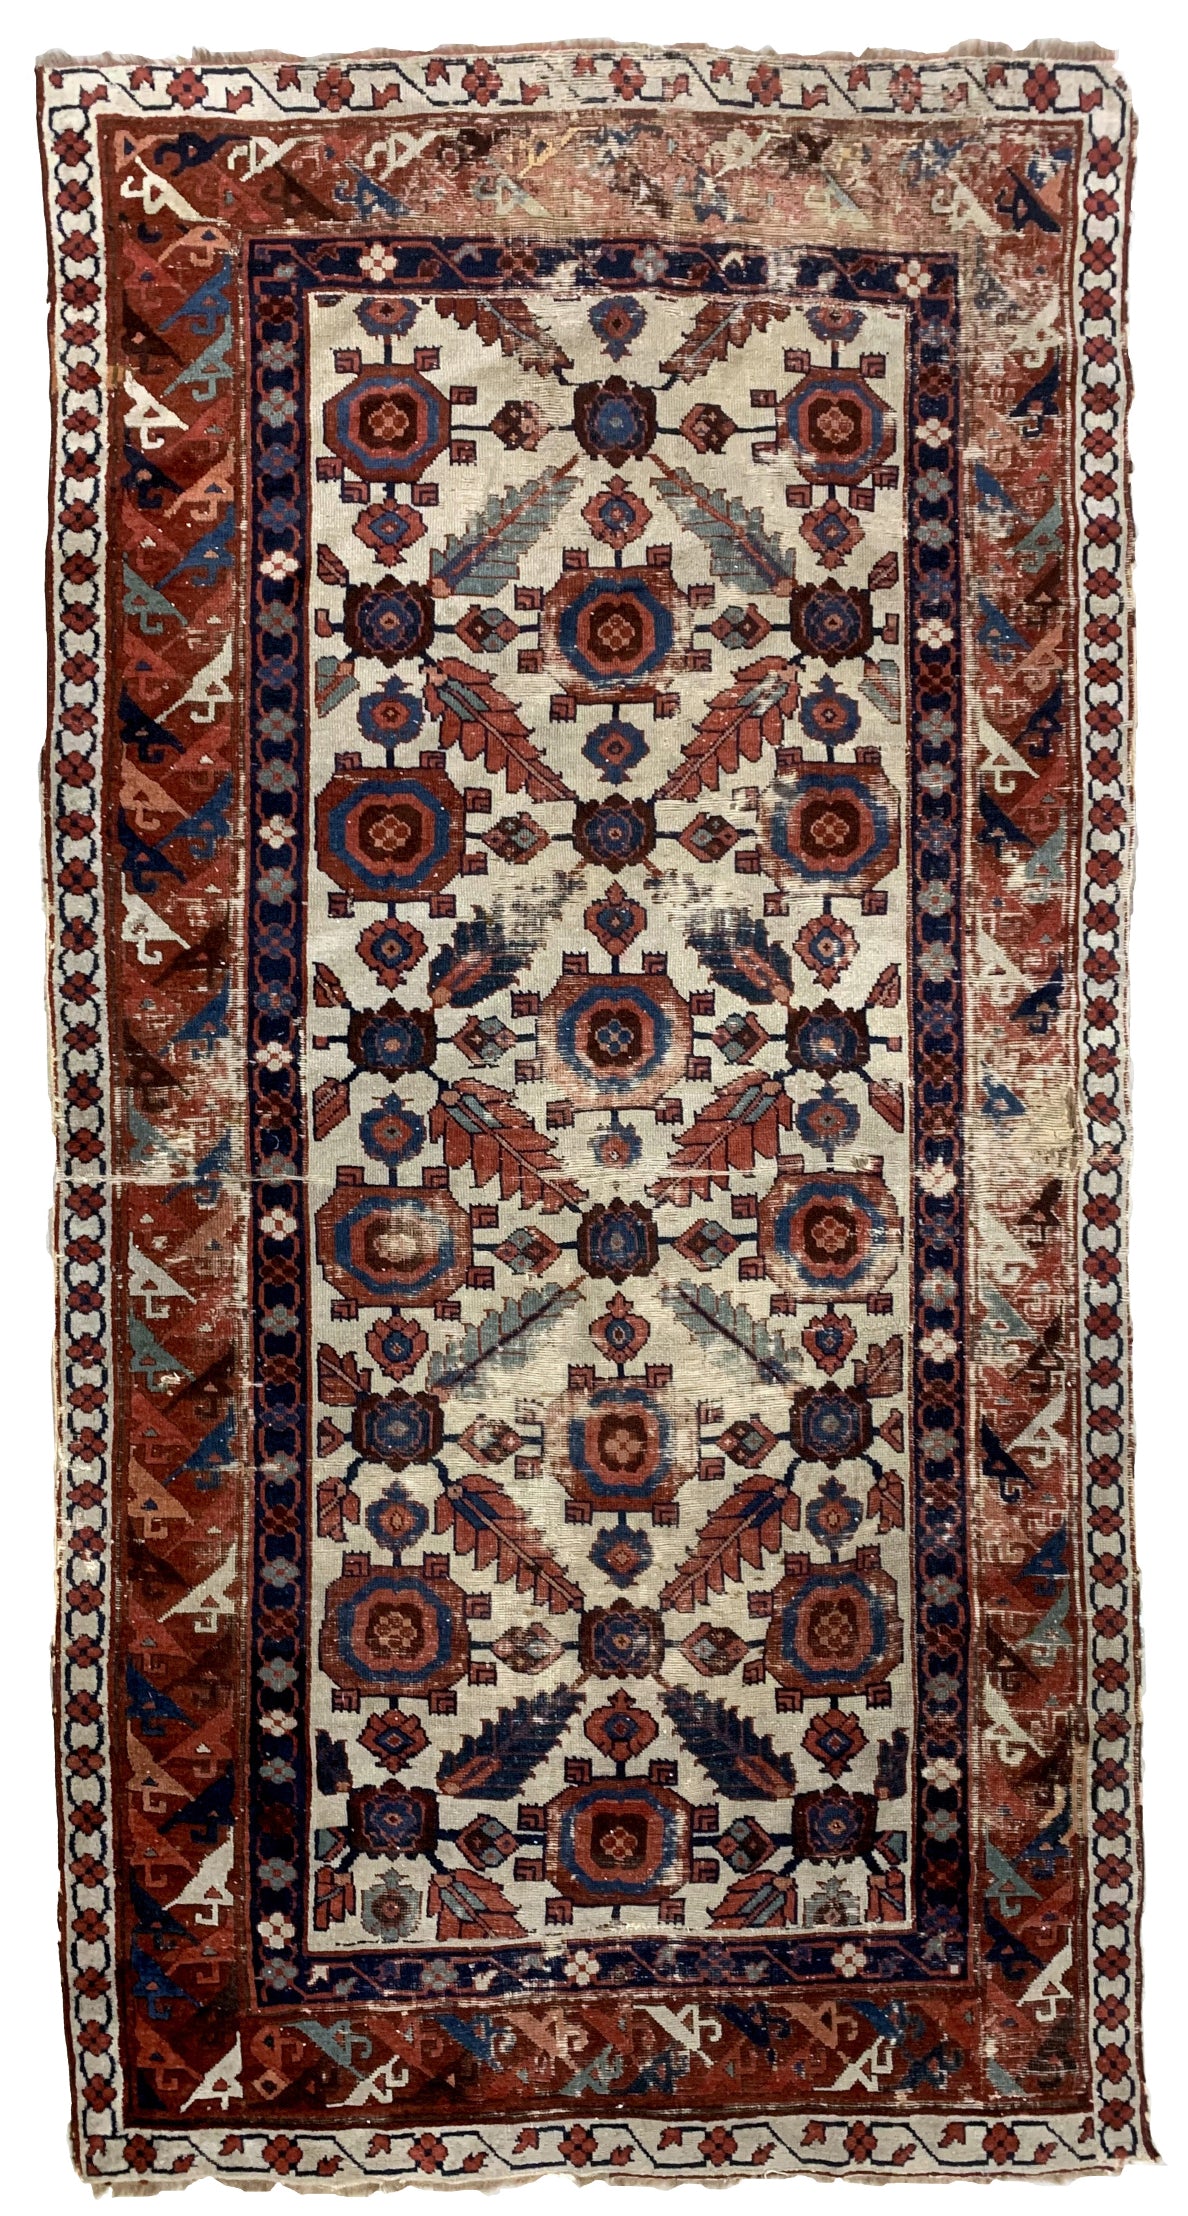 Handmade antique North-West Persian rug 1820s